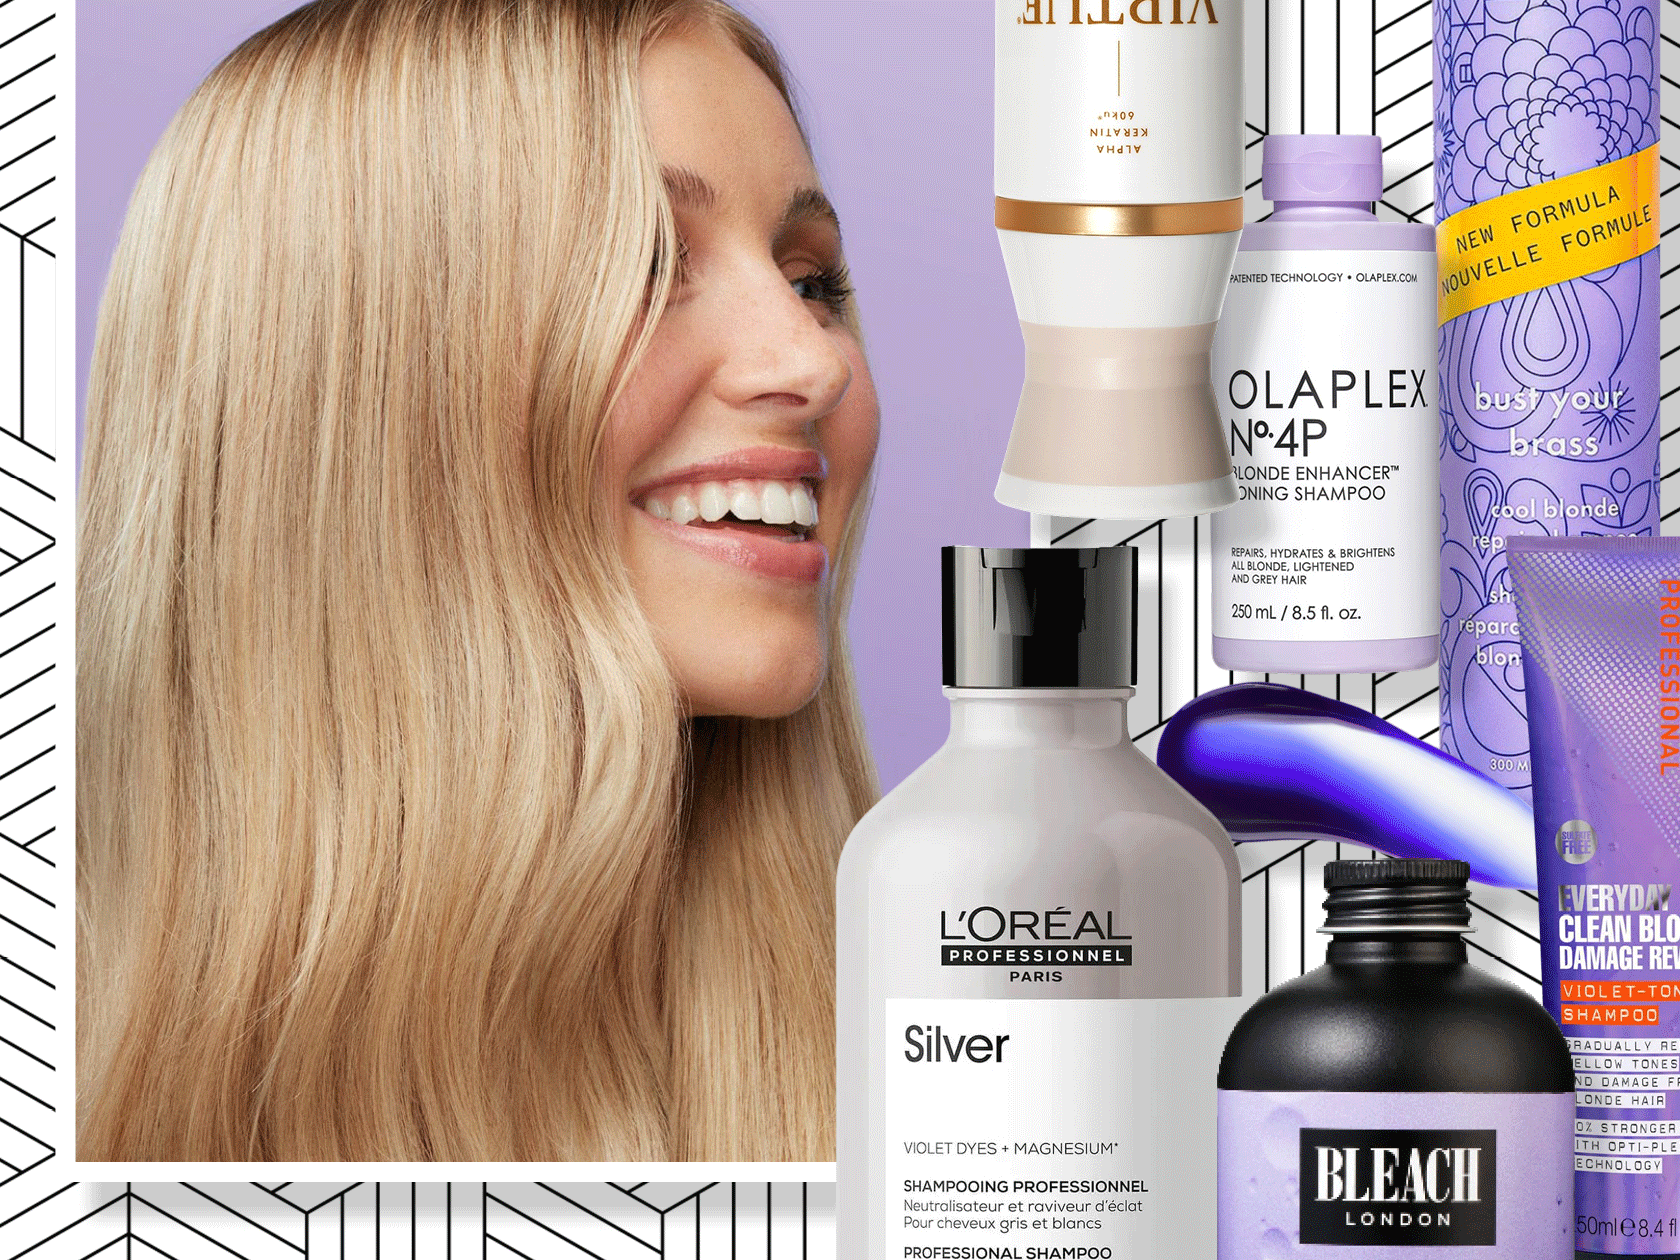 The best purple shampoos for keeping your blonde bright